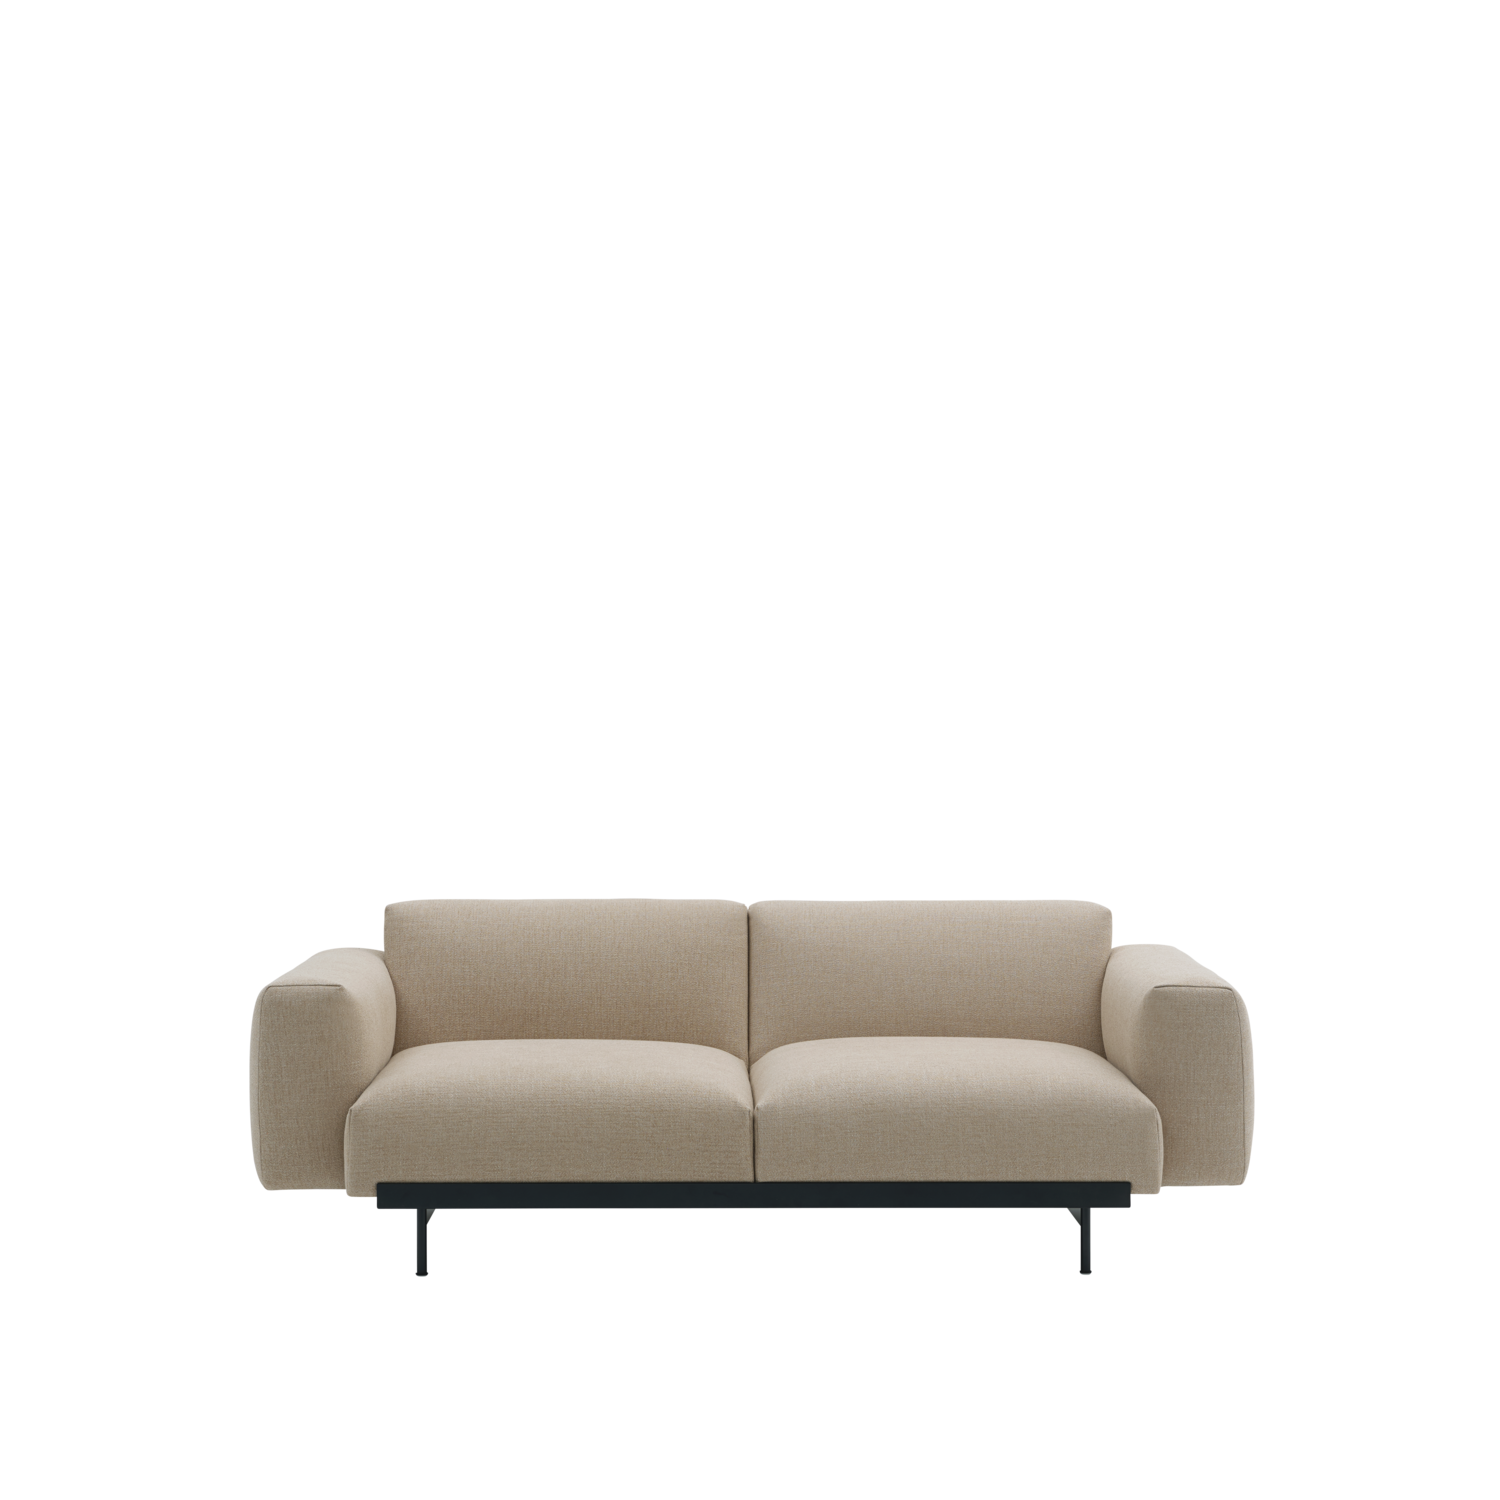 In Situ Modular Sofa | The heart of any space